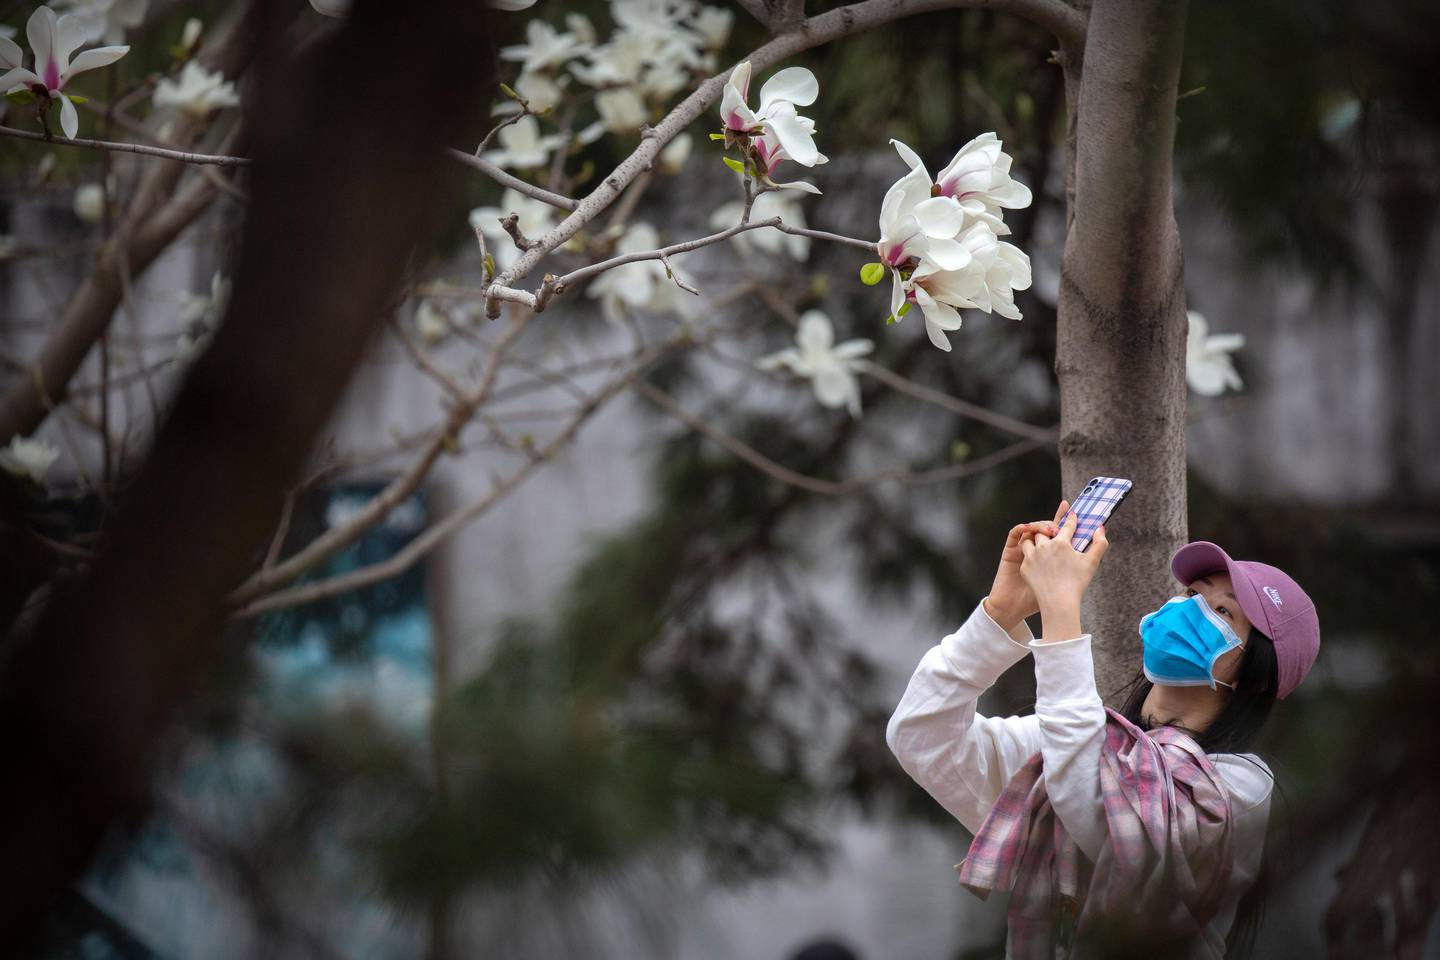 A woman wearing a face mask takes a photo of blossoms at the Beijing Zoo after it reopened its outdoor exhibit areas to the public since they were closed during the coronavirus outbreak in Beijing, Tuesday, March 24, 2020. The Chinese government is pushing efforts to kick-start the world's second-largest economy and put money in the pockets of workers who have gone weeks without salaries. While most of Beijing's world-famous tourist sites remain closed, the city zoo and parts of the Great Wall are again accepting visitors by appointment, and some restaurants were reopening for business on the condition that customers do not sit facing each other. (AP Photo/Mark Schiefelbein)